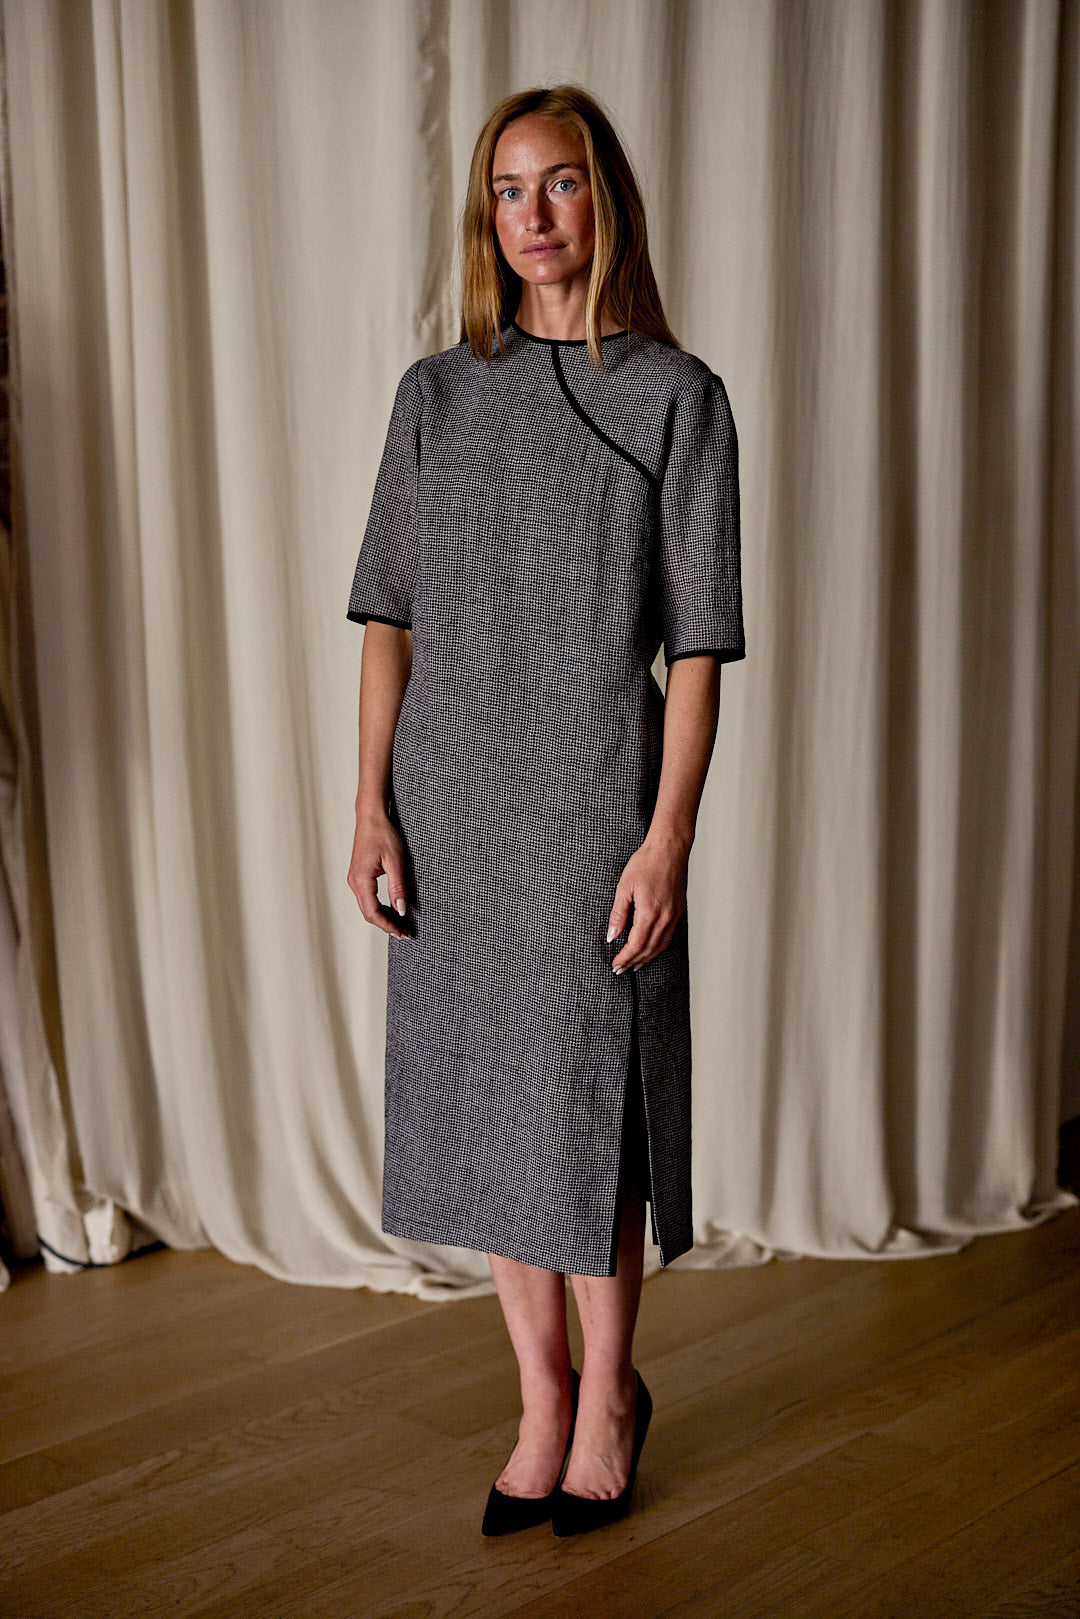 A woman with long, light brown hair wearing a knee-length, gray Qipao Dress | Japanese Wool Gauze Houndstooth and black shoes is standing on a wooden floor in front of cream-colored curtains, looking at the camera. The dress embodies sustainable design through its use of Japanese wool gauze.